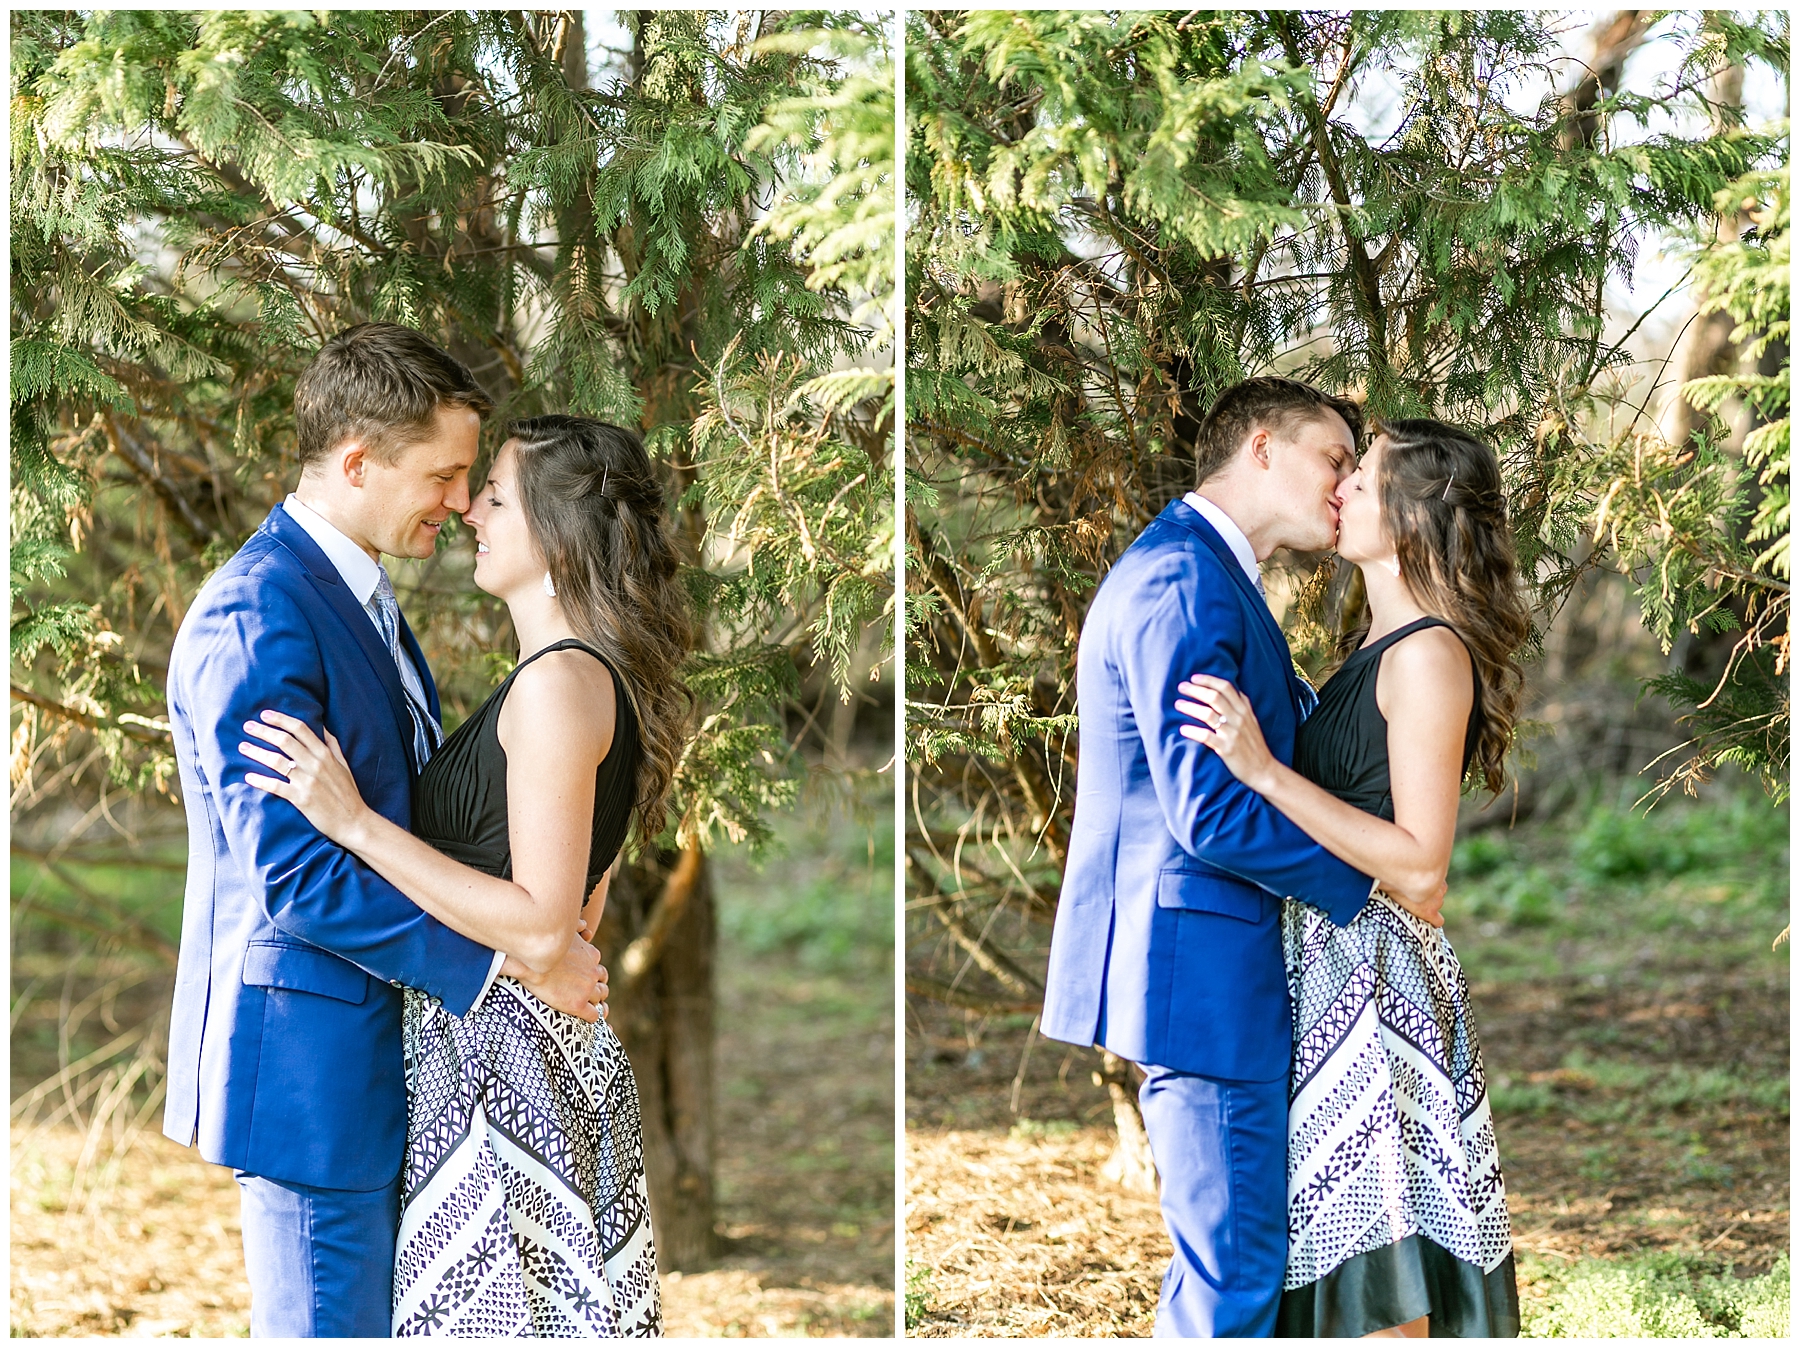 Chelsea Phil Private Estate Engagement Living Radiant Photography photos color_0021.jpg